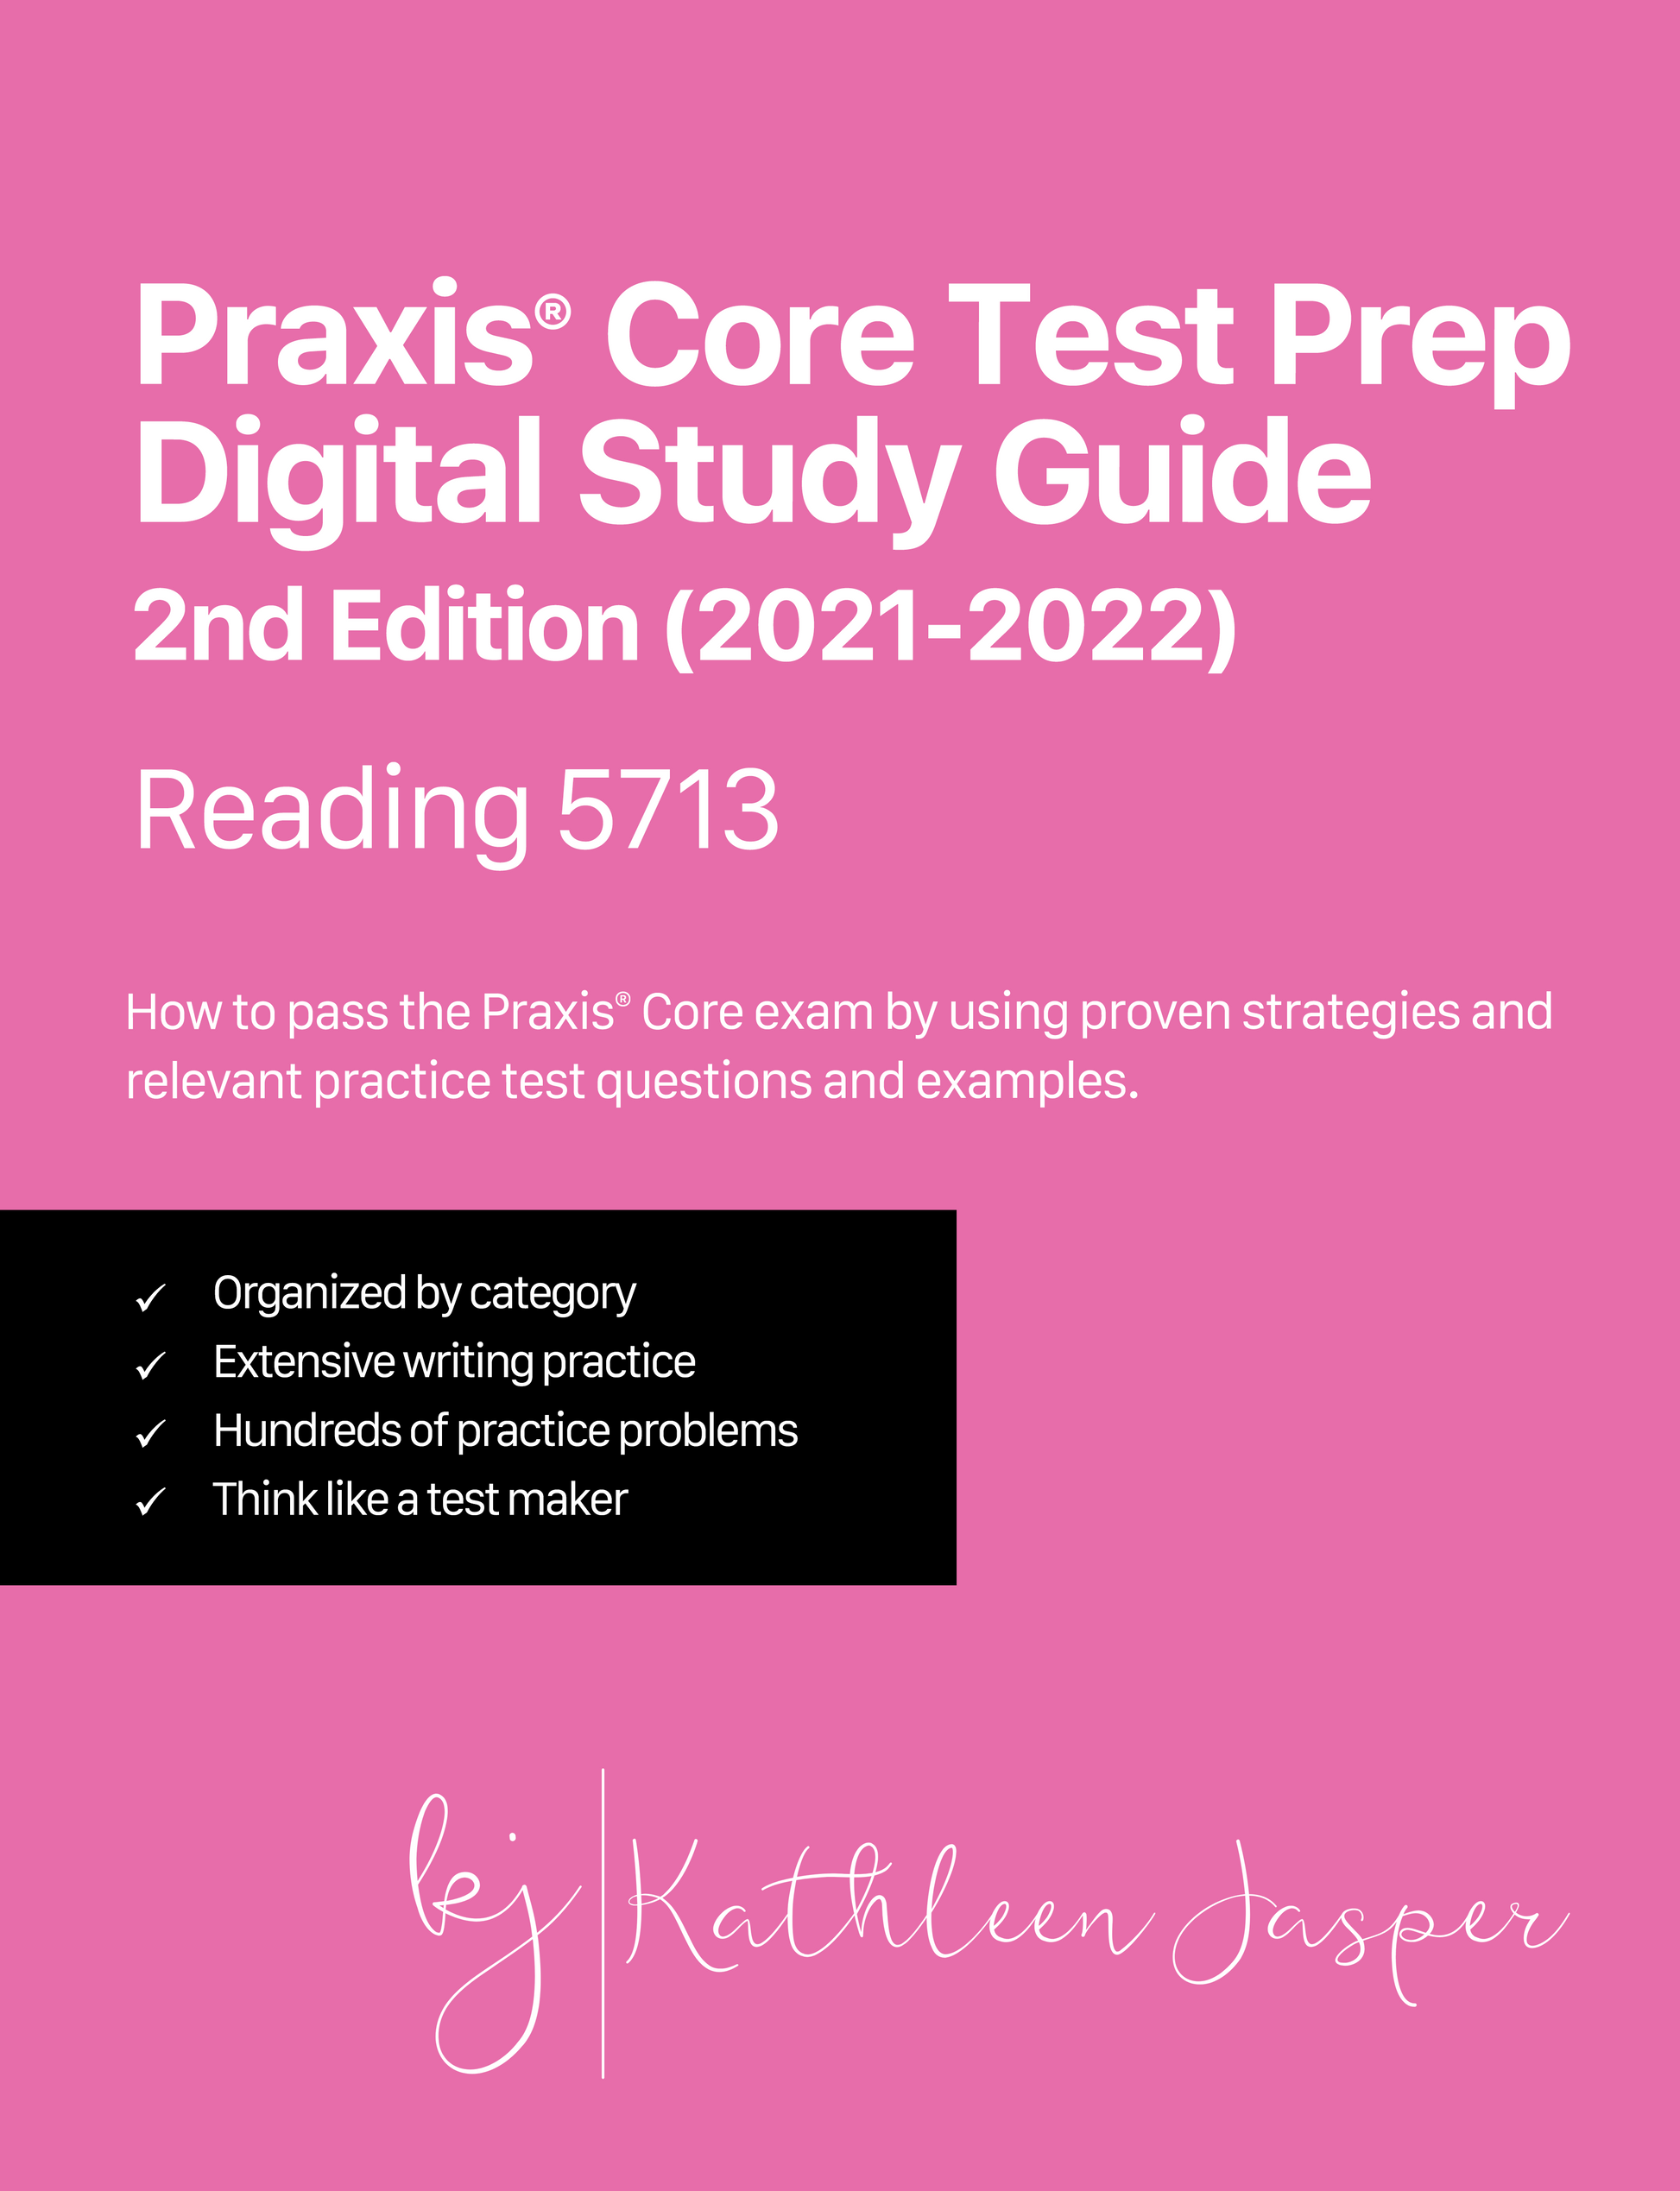 Praxis core test prep digital study guide 2nd edition reading 5713